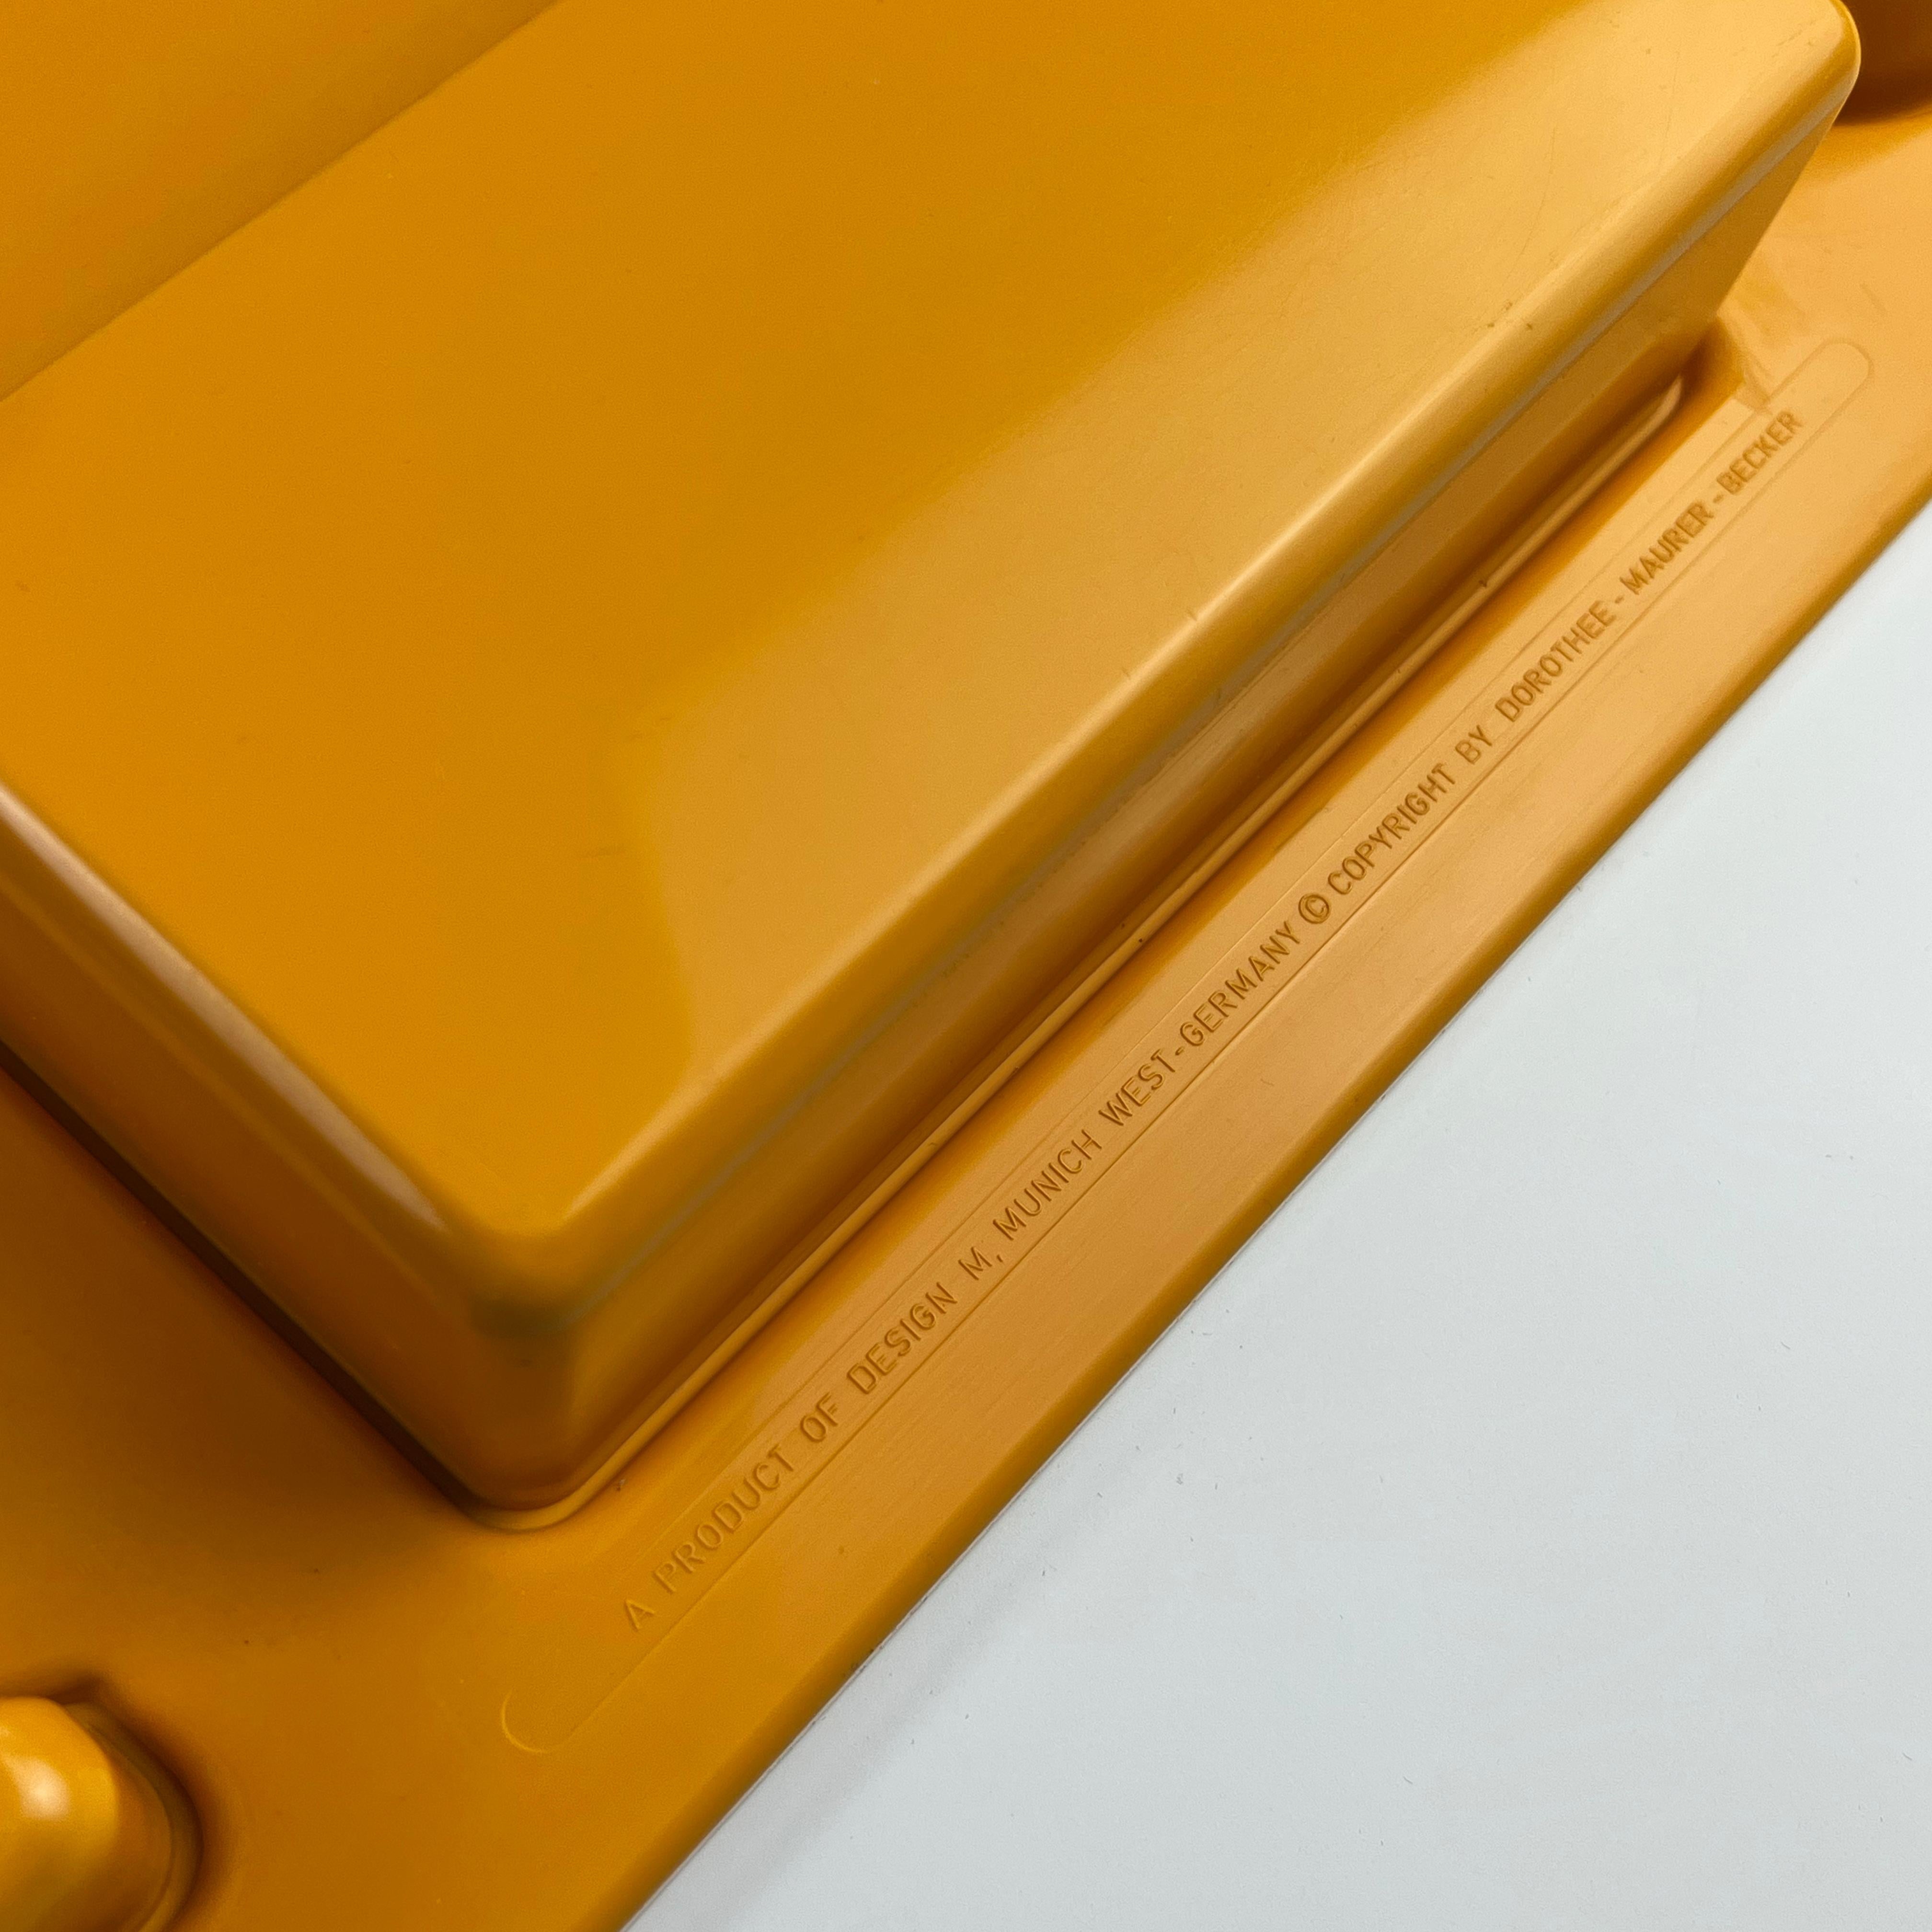 Late 20th Century Yellow “Utensilo” Plastic Wall Storage Unit designed by Dorothee Maurer Becker 